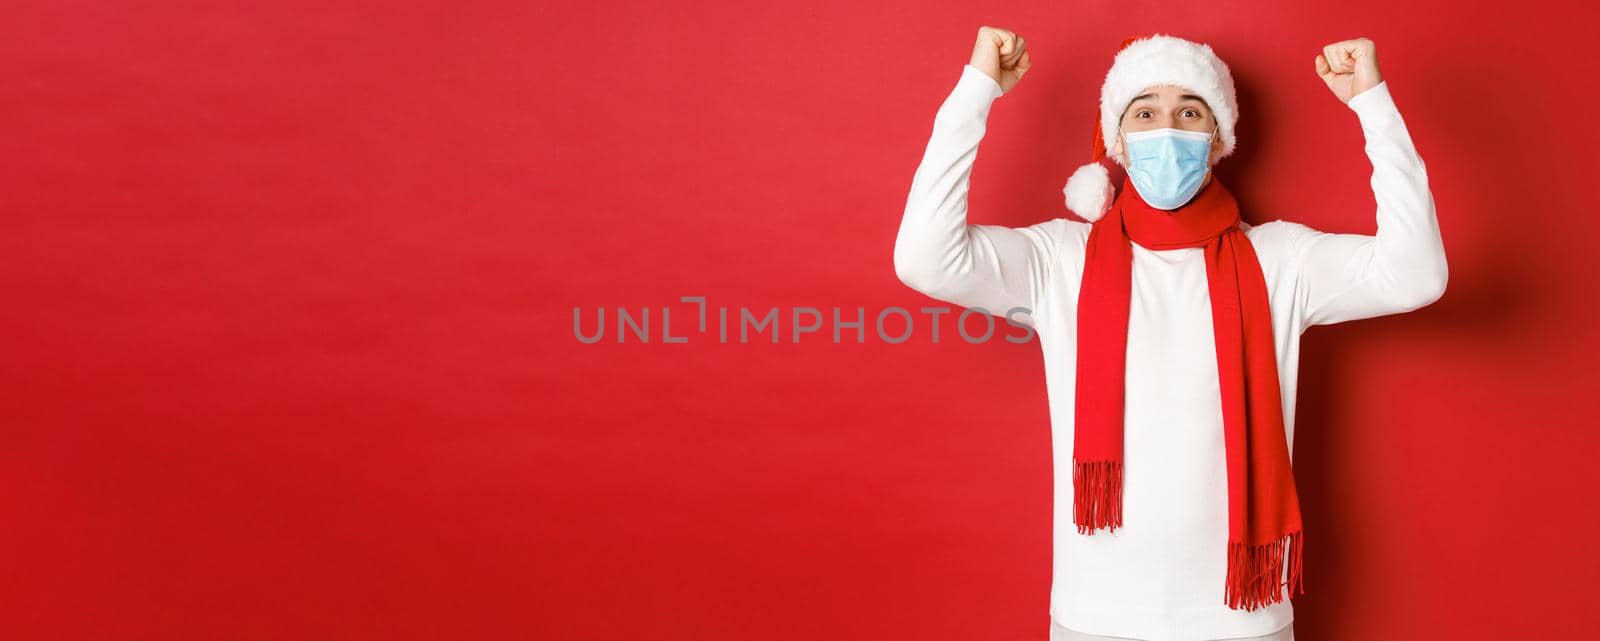 Concept of covid-19, christmas and holidays during pandemic. Portrait of happy man in santa hat and medical mask, rejoicing and celebrating new year, standing over red background.